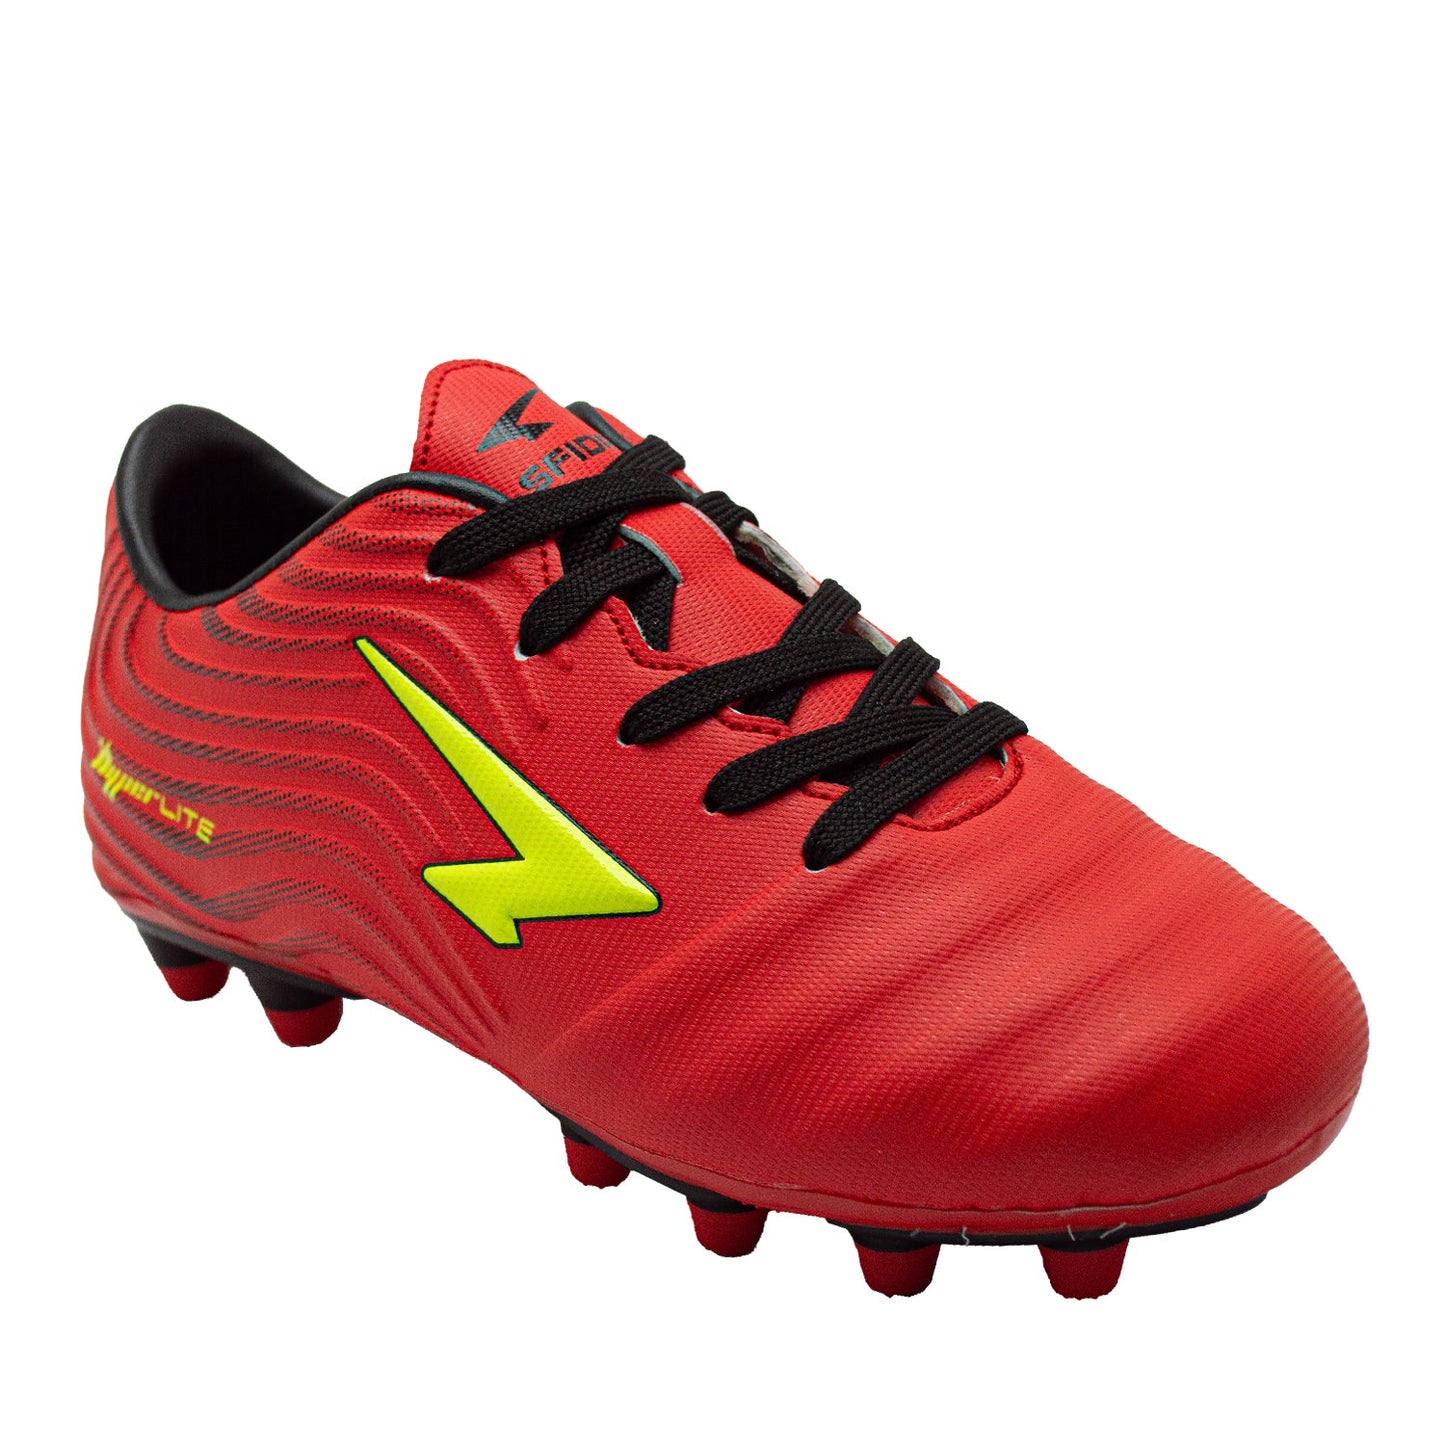 Swell Junior Football Boots - Red/Black/Yellow